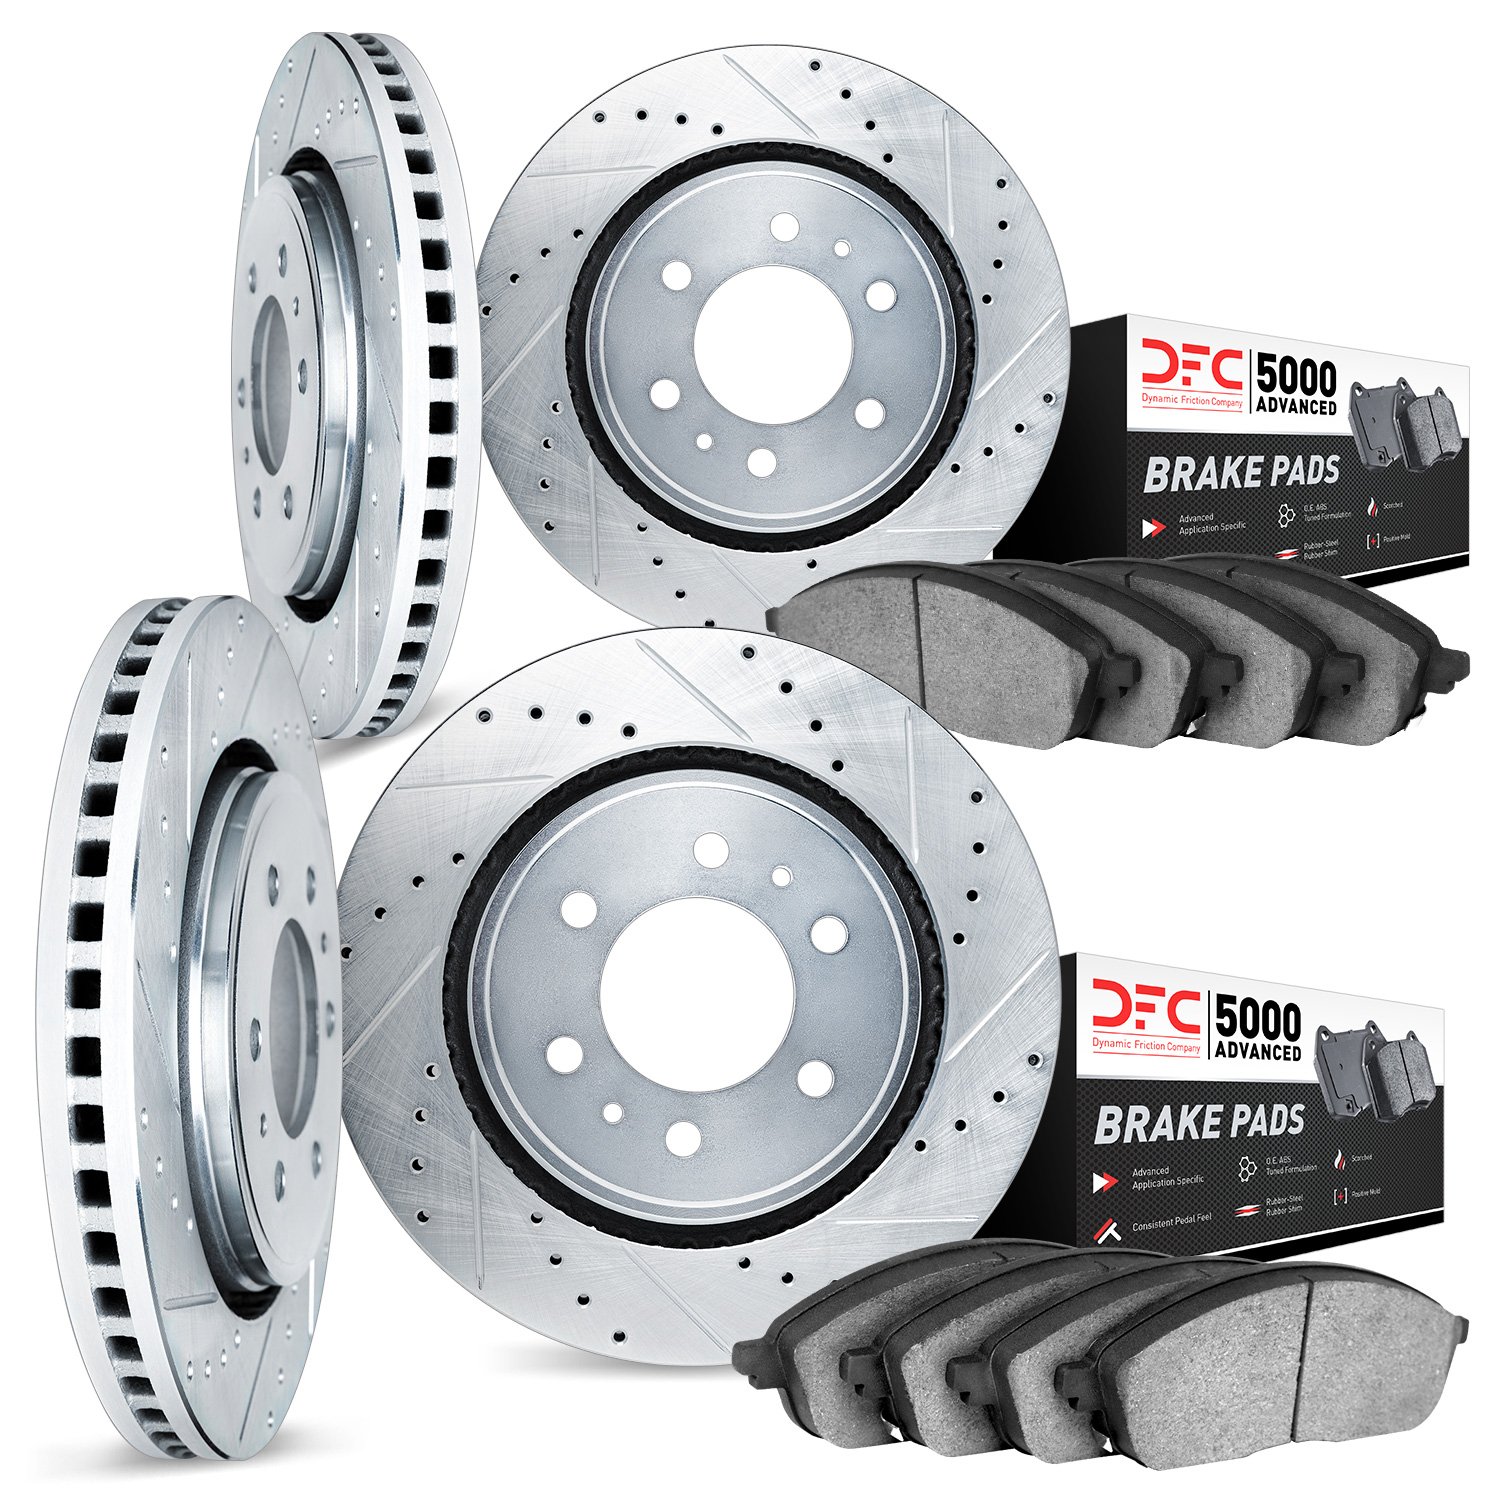 7504-47262 Drilled/Slotted Brake Rotors w/5000 Advanced Brake Pads Kit [Silver], Fits Select GM, Position: Front and Rear